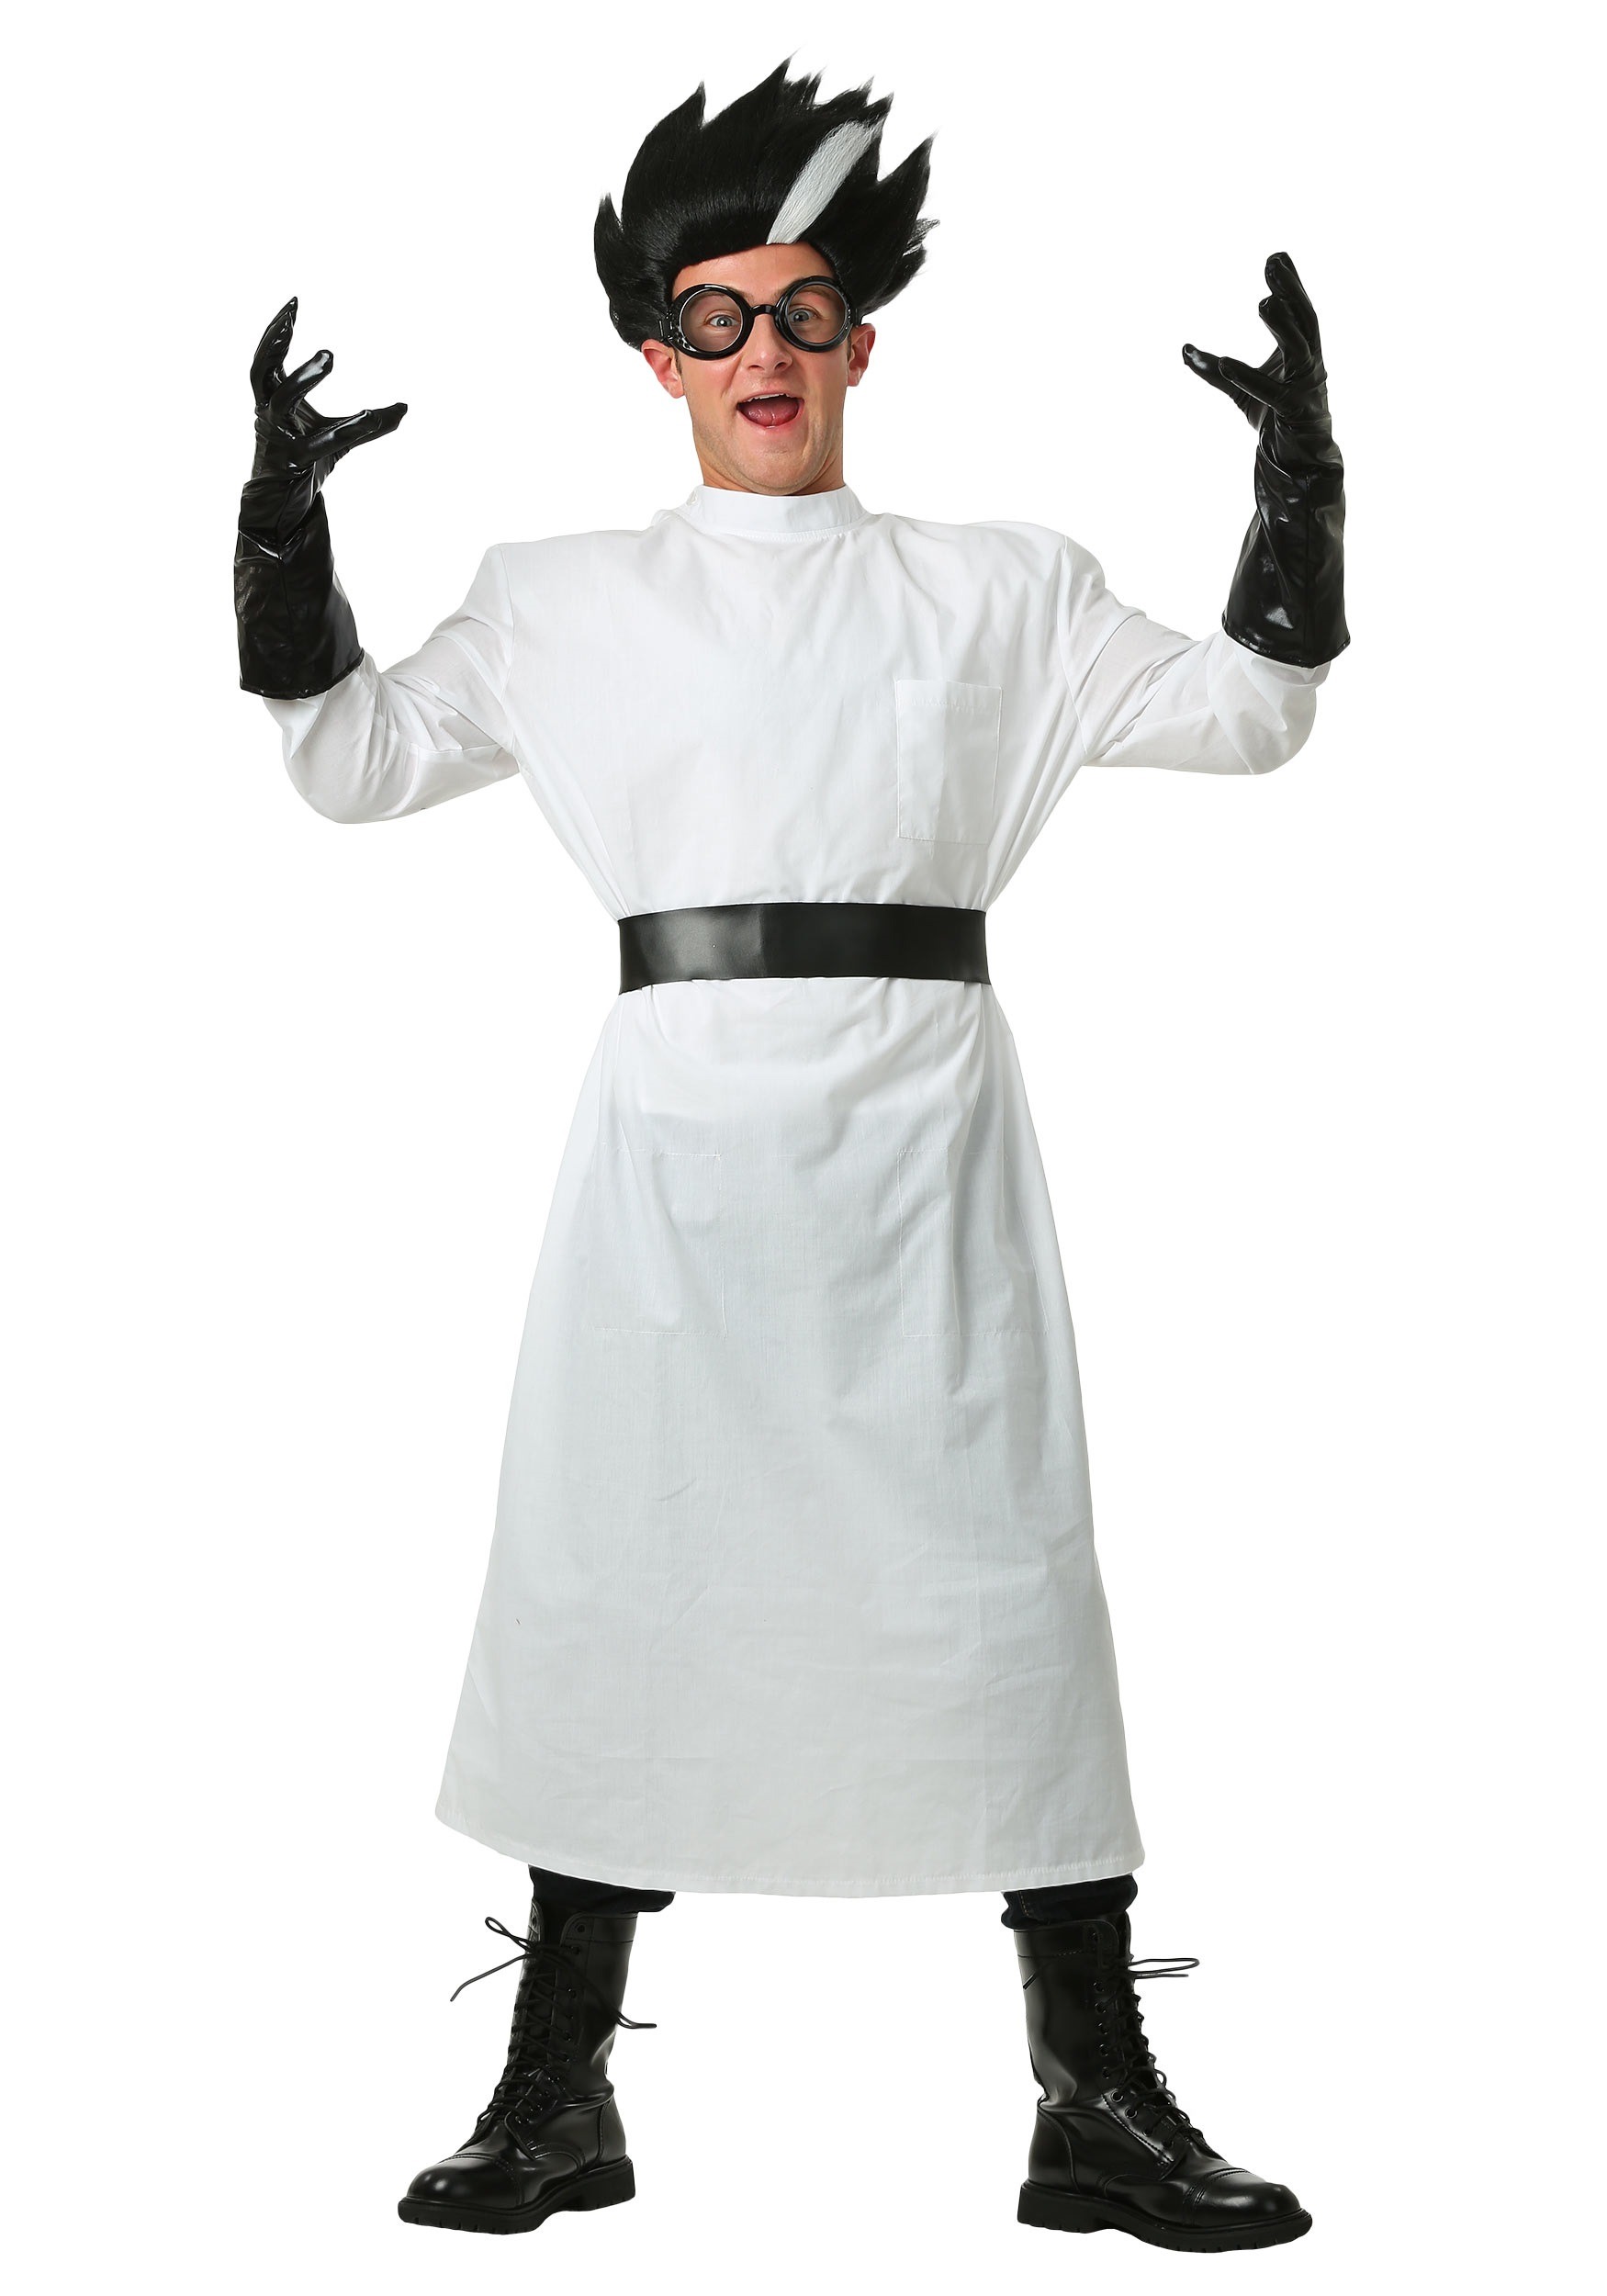 Photos - Fancy Dress Deluxe FUN Costumes  Mad Scientist Adult Costume Black/White FUN0148AD 